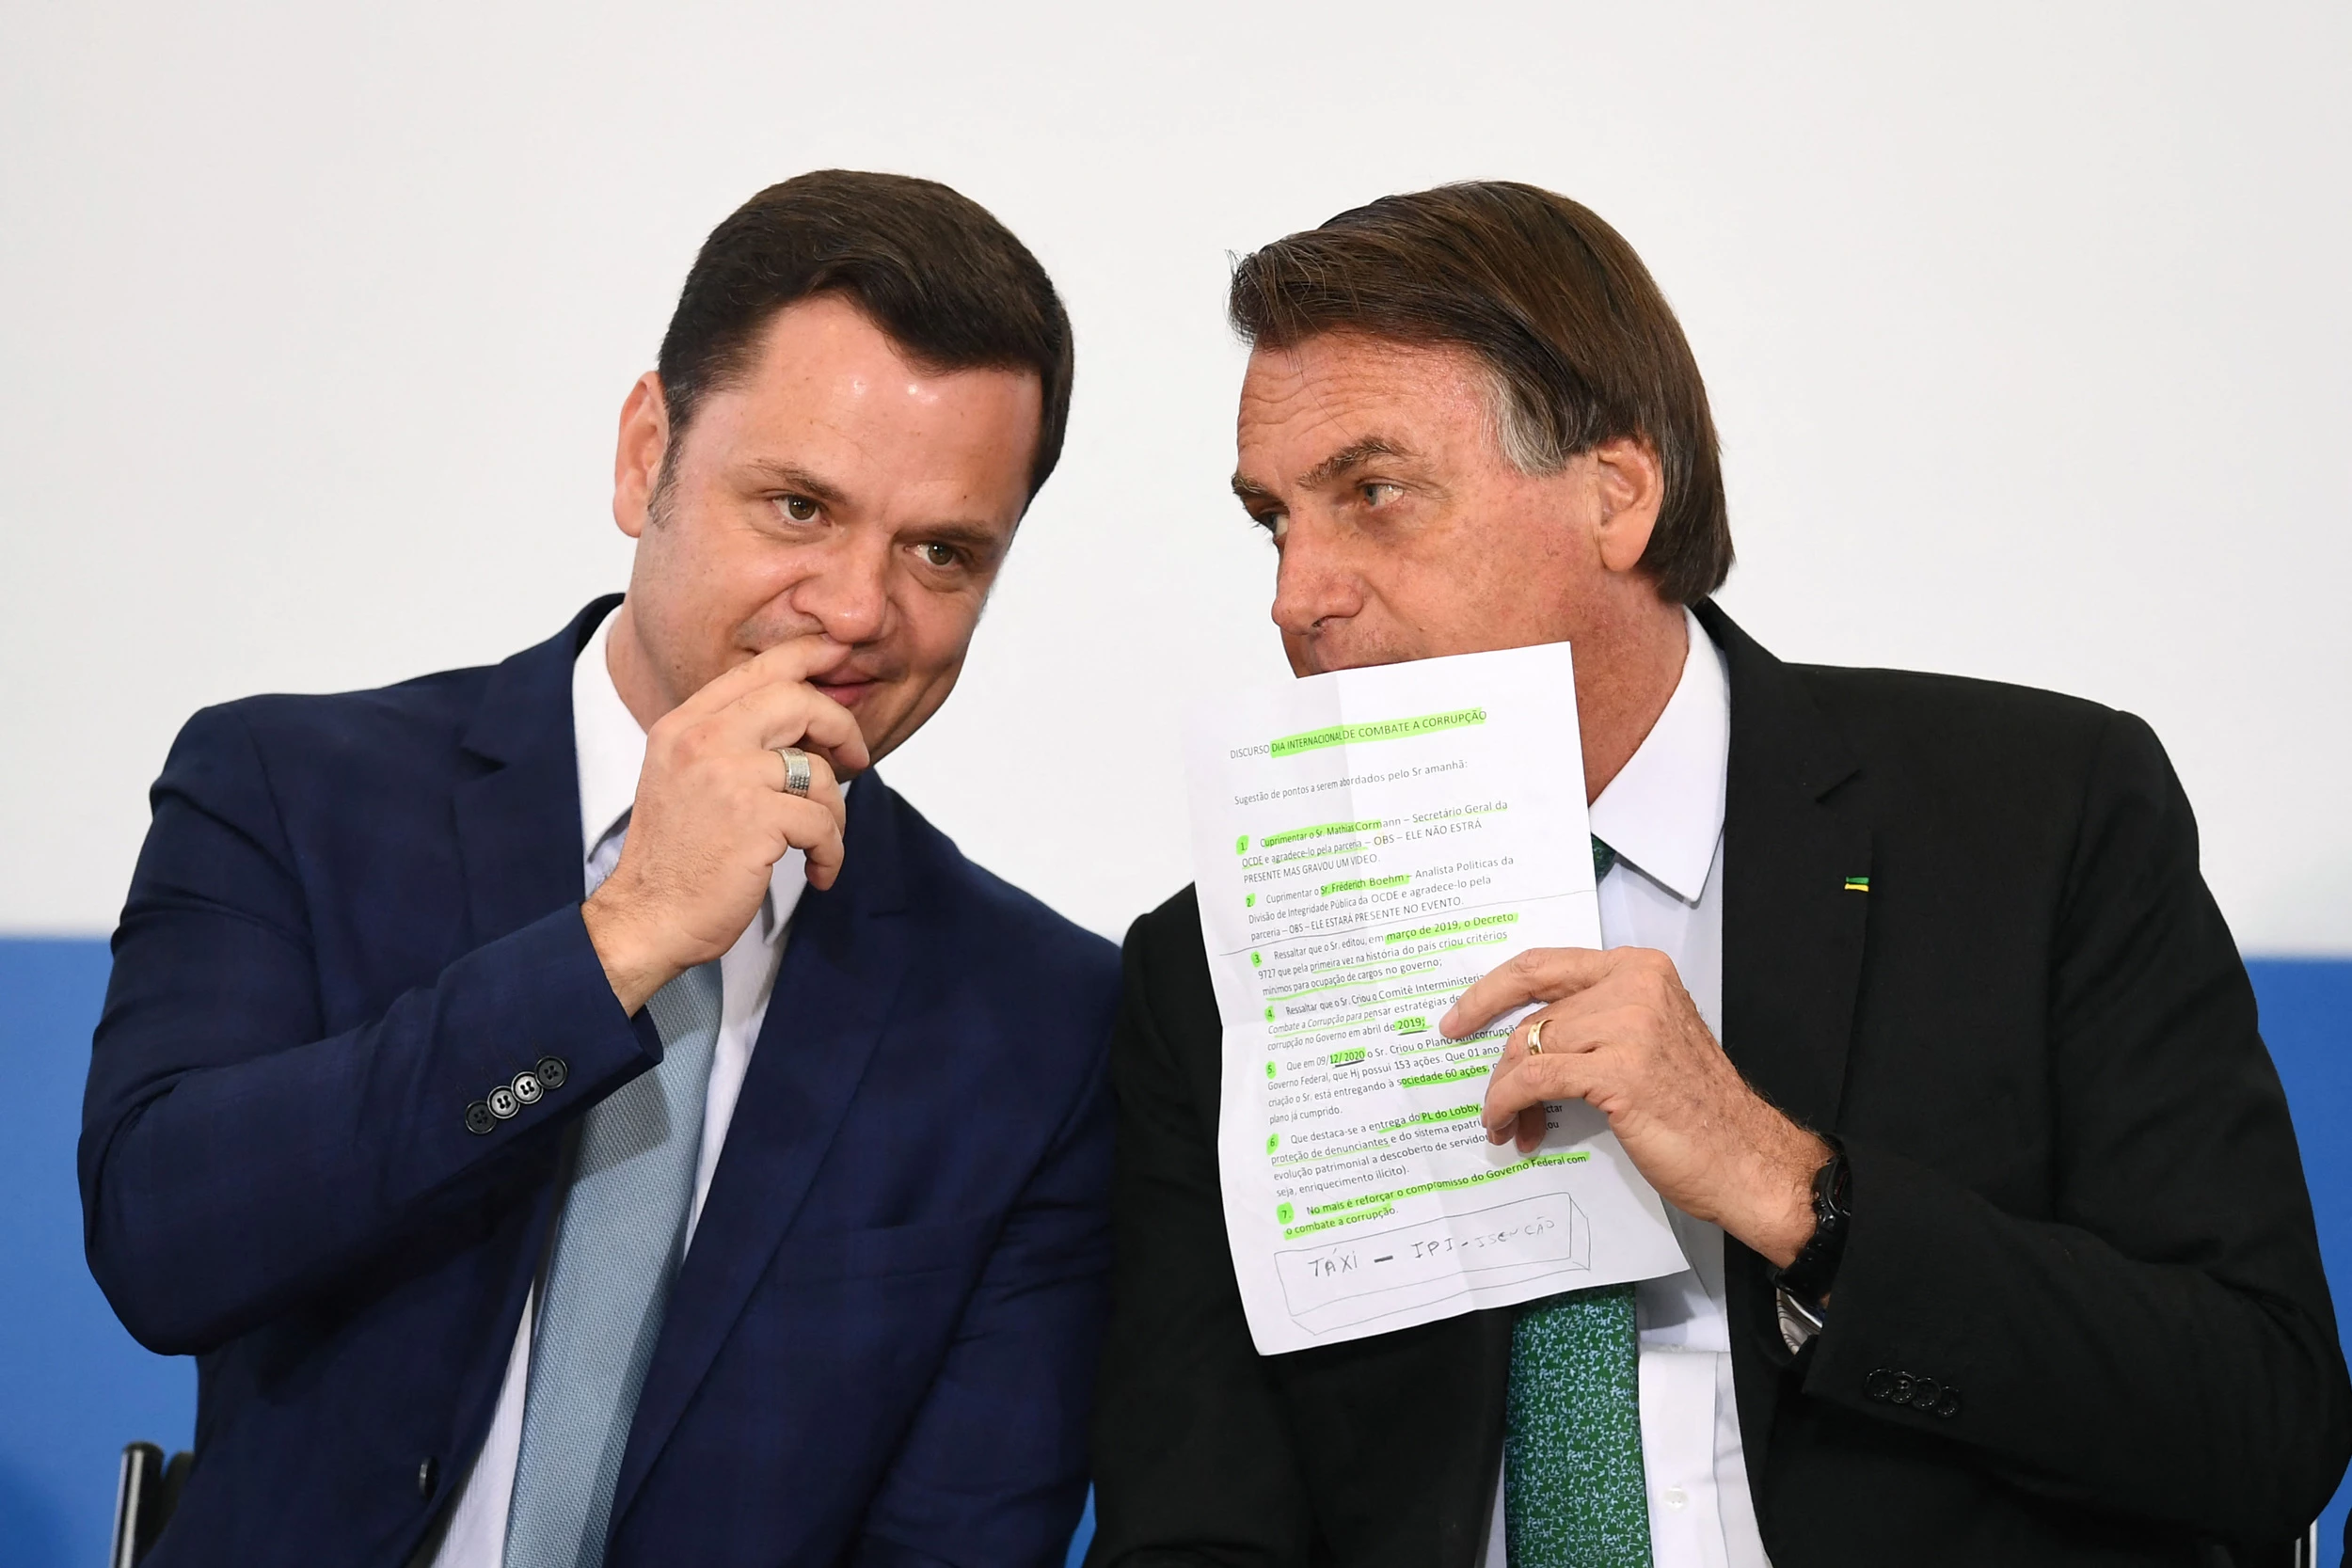 Brazilian President Jair Bolsonaro (R) and his Justice Minister Anderson Torres attend a ceremony on the International Day Against Corruption at Planalto Palace in Brasilia, on December 9, 2021. (Photo by EVARISTO SA / AFP) (Photo by EVARISTO SA/AFP via Getty Images)